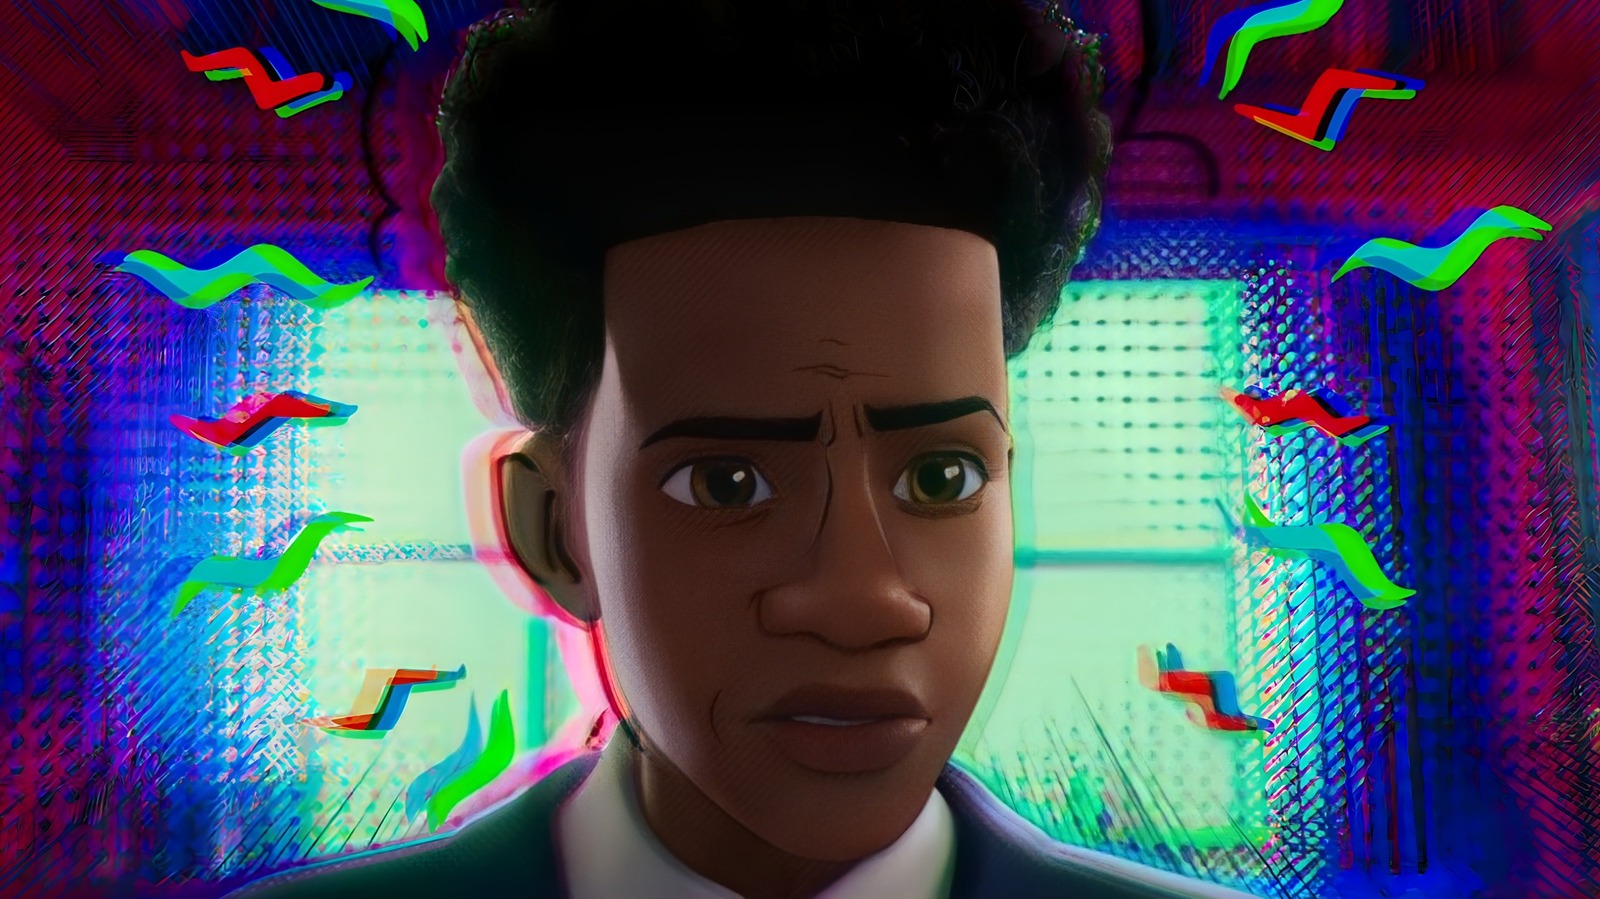 Every Spider-Man cameo and Easter egg in Across the Spider-Verse - Polygon